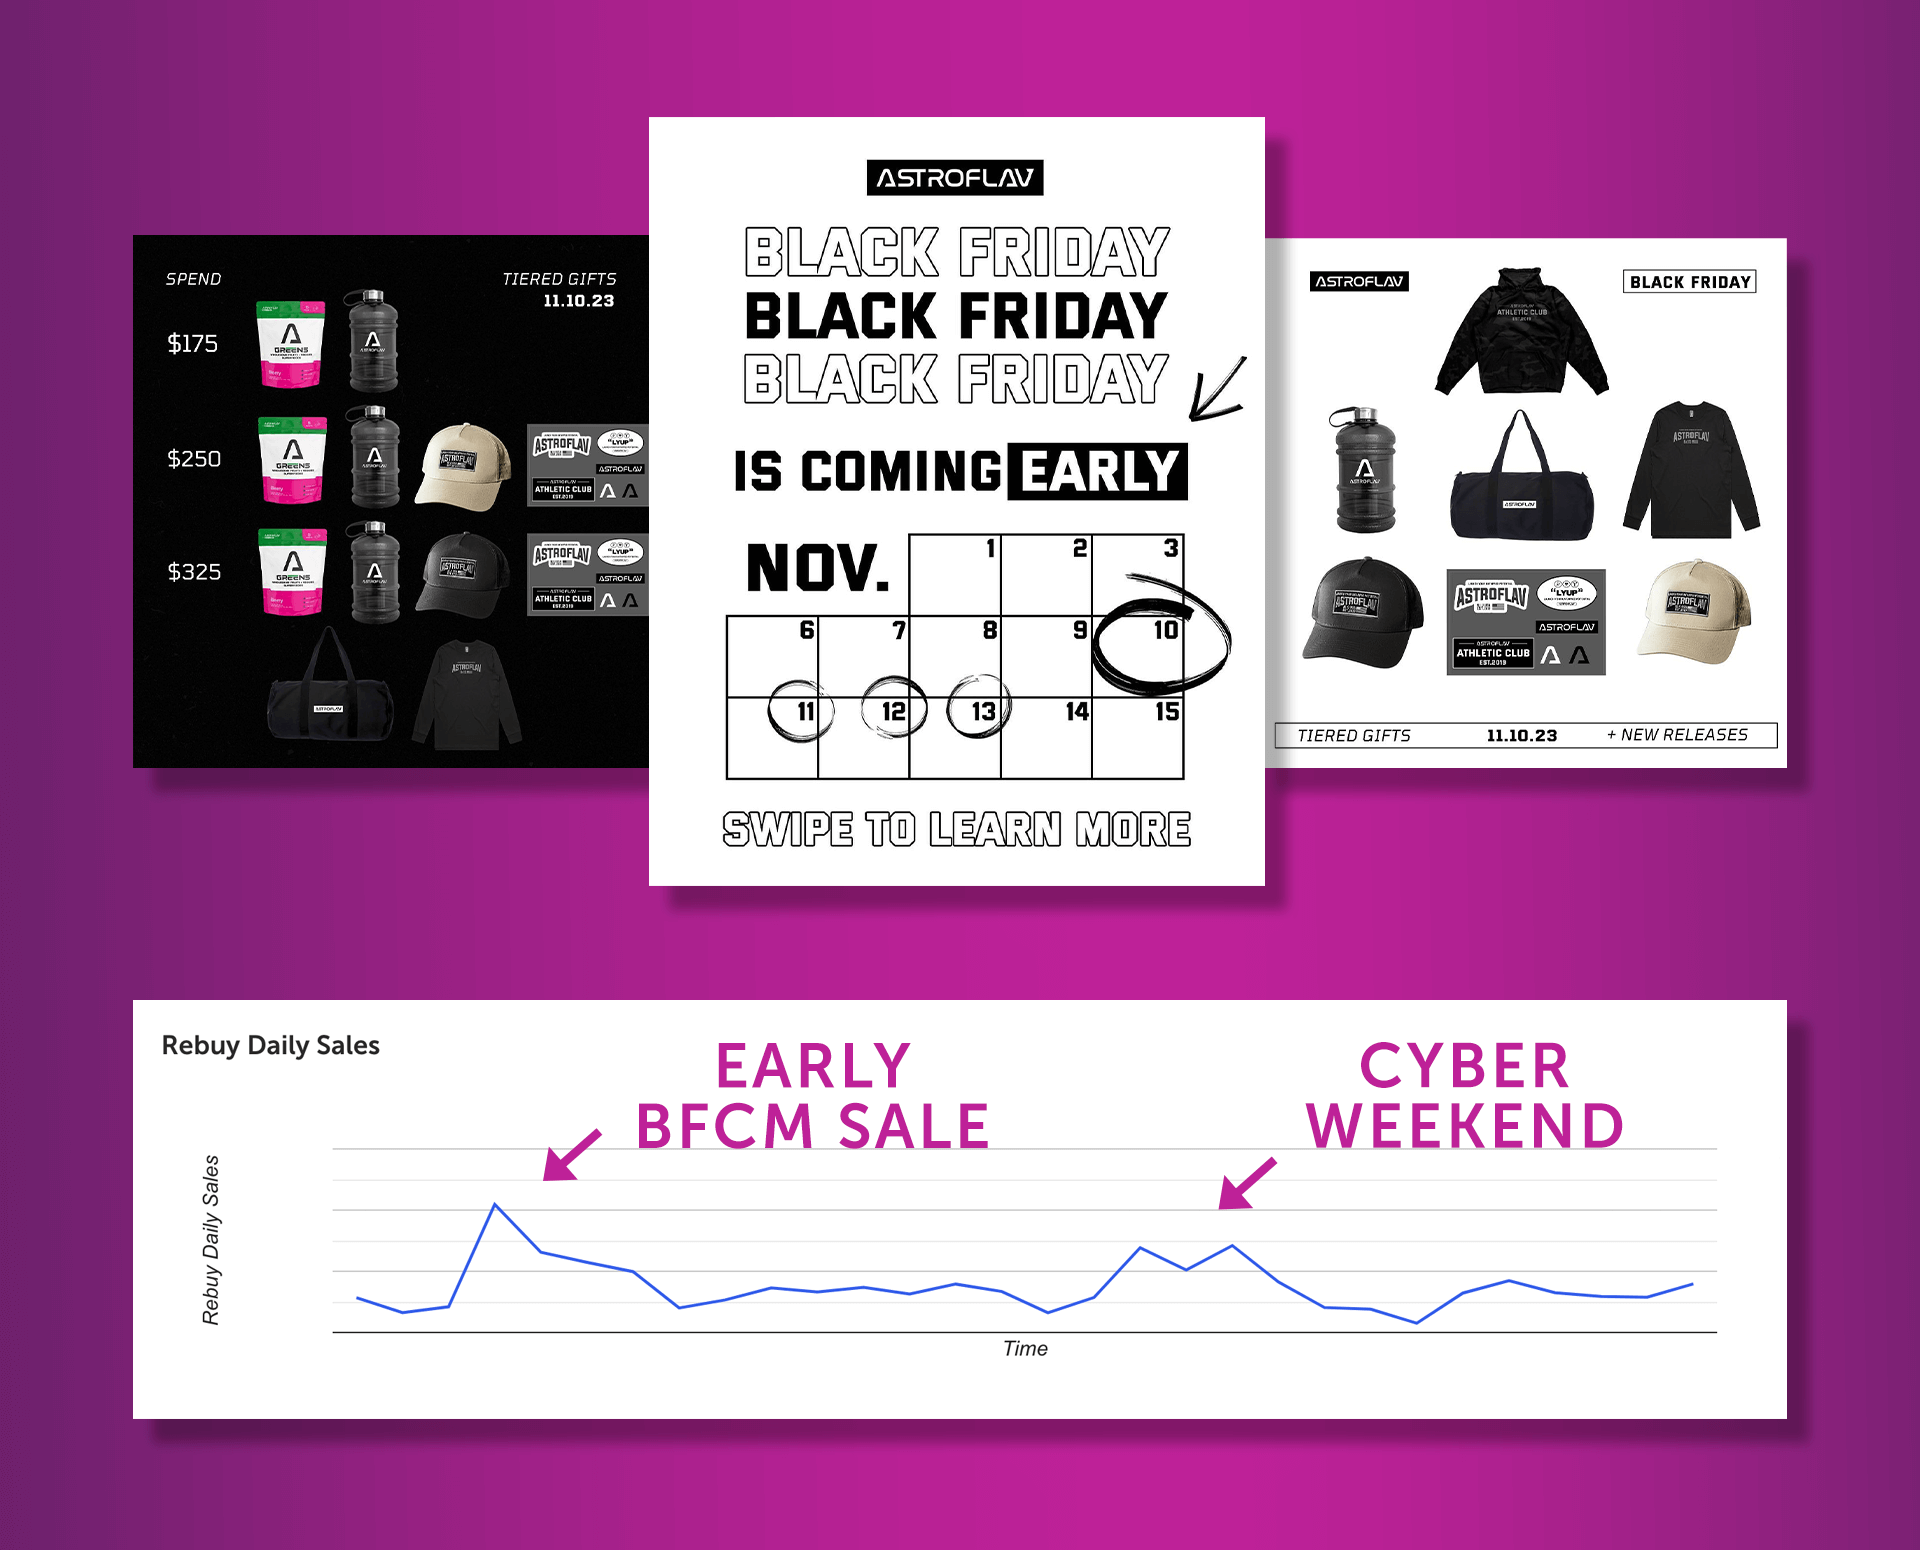 AstroFlav BFCM promotional materials and sales graph